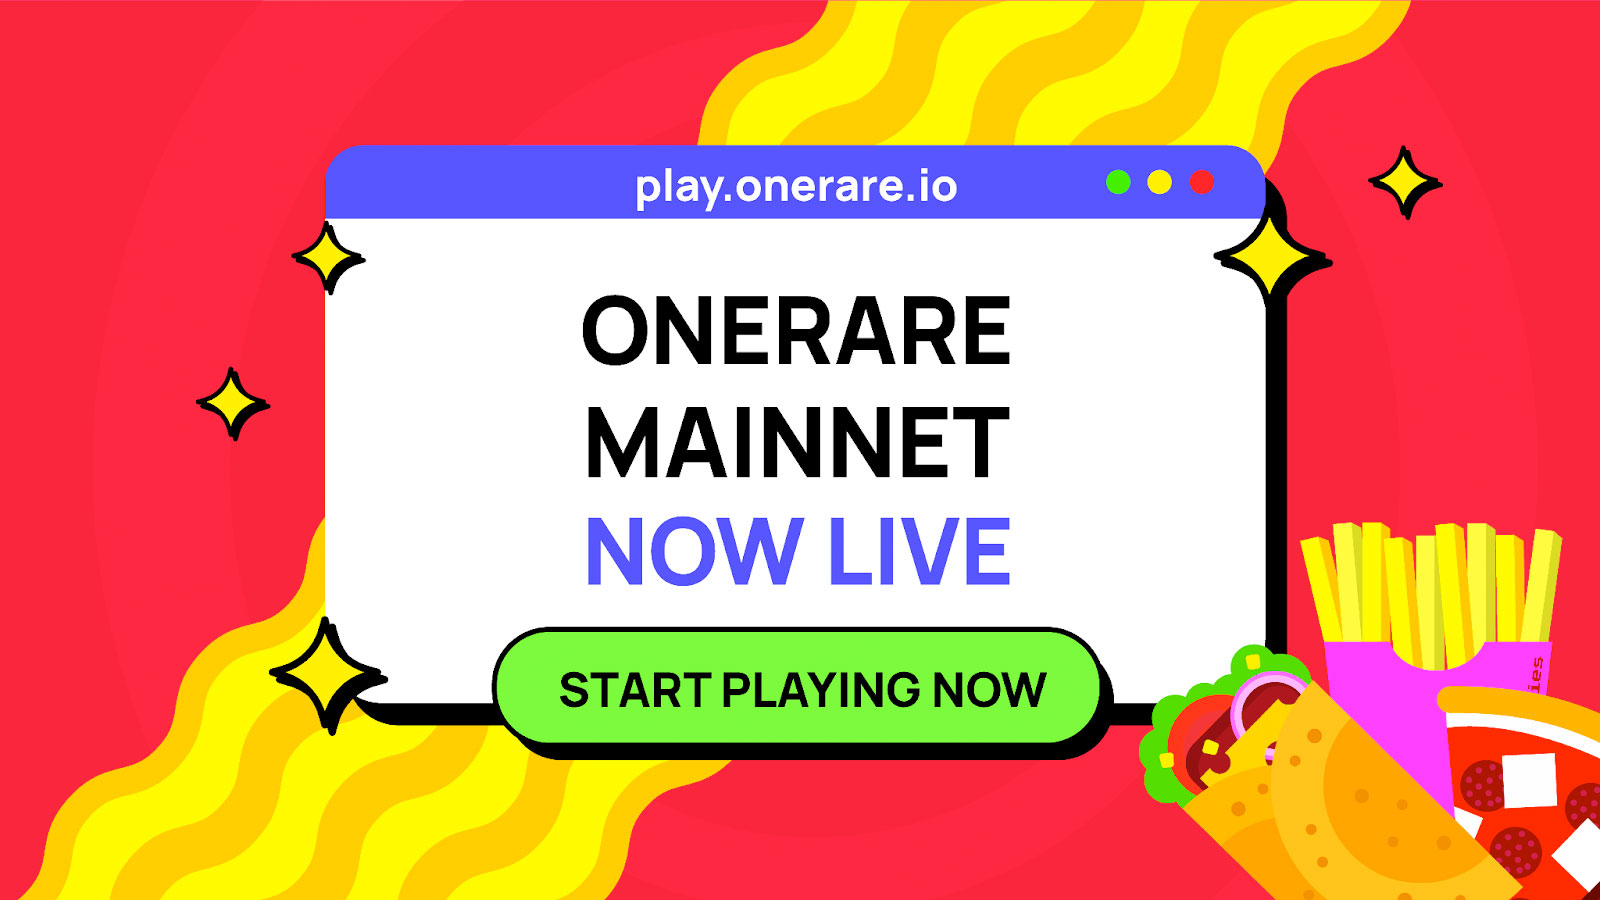 OneRare Food Metaverse Mainnet is Now Live!